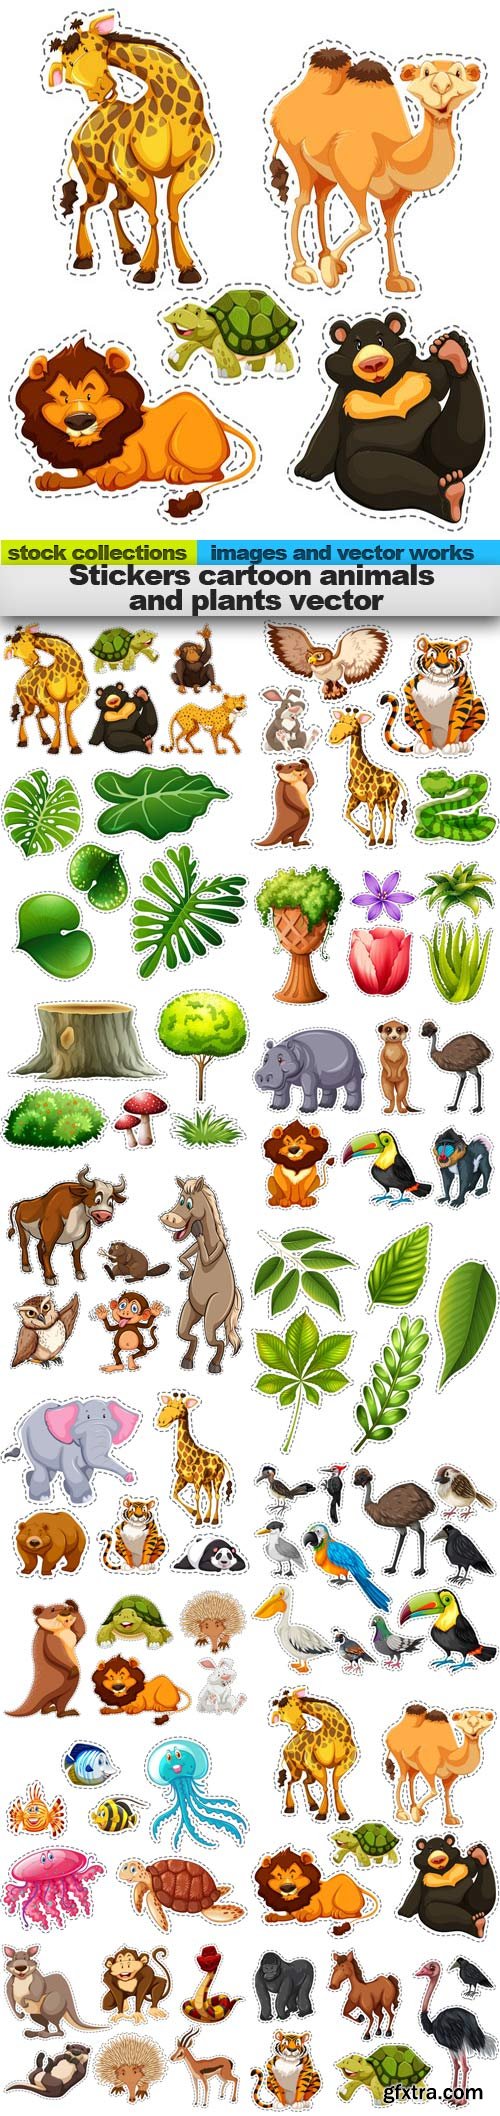 Stickers cartoon animals and plants vector, 15 x EPS